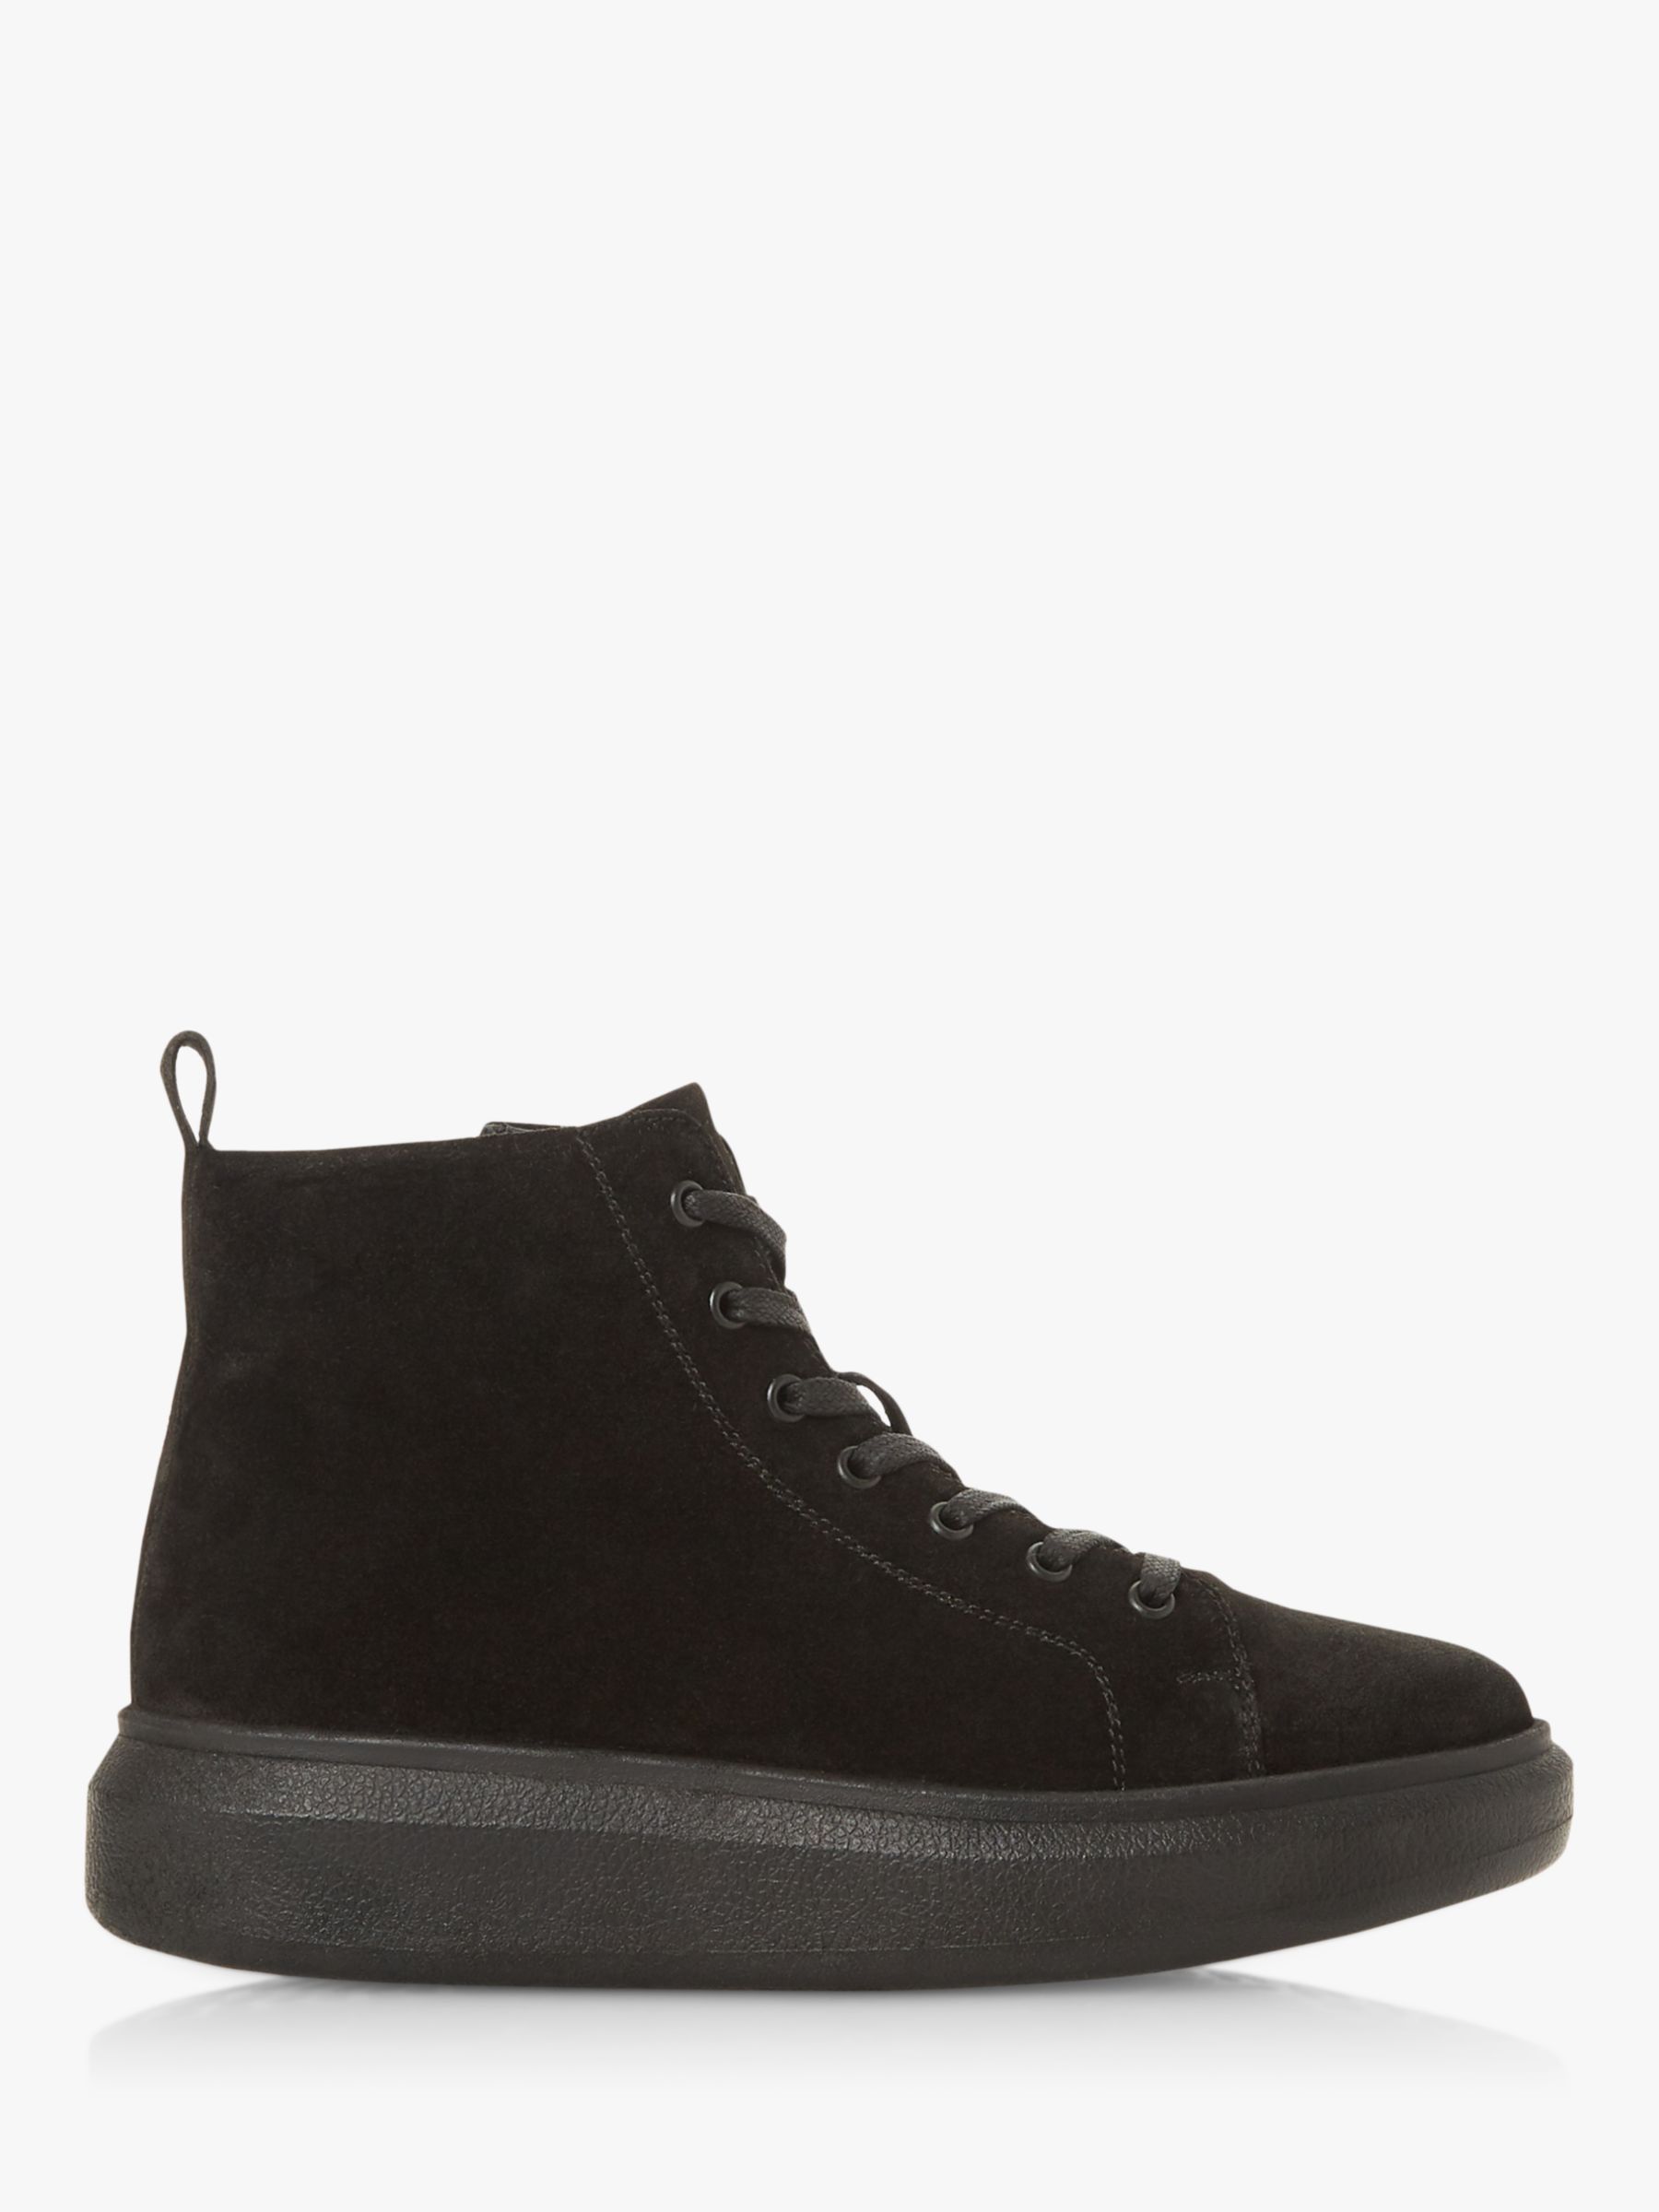 Dune Perrie Suede High Top Trainers, Black